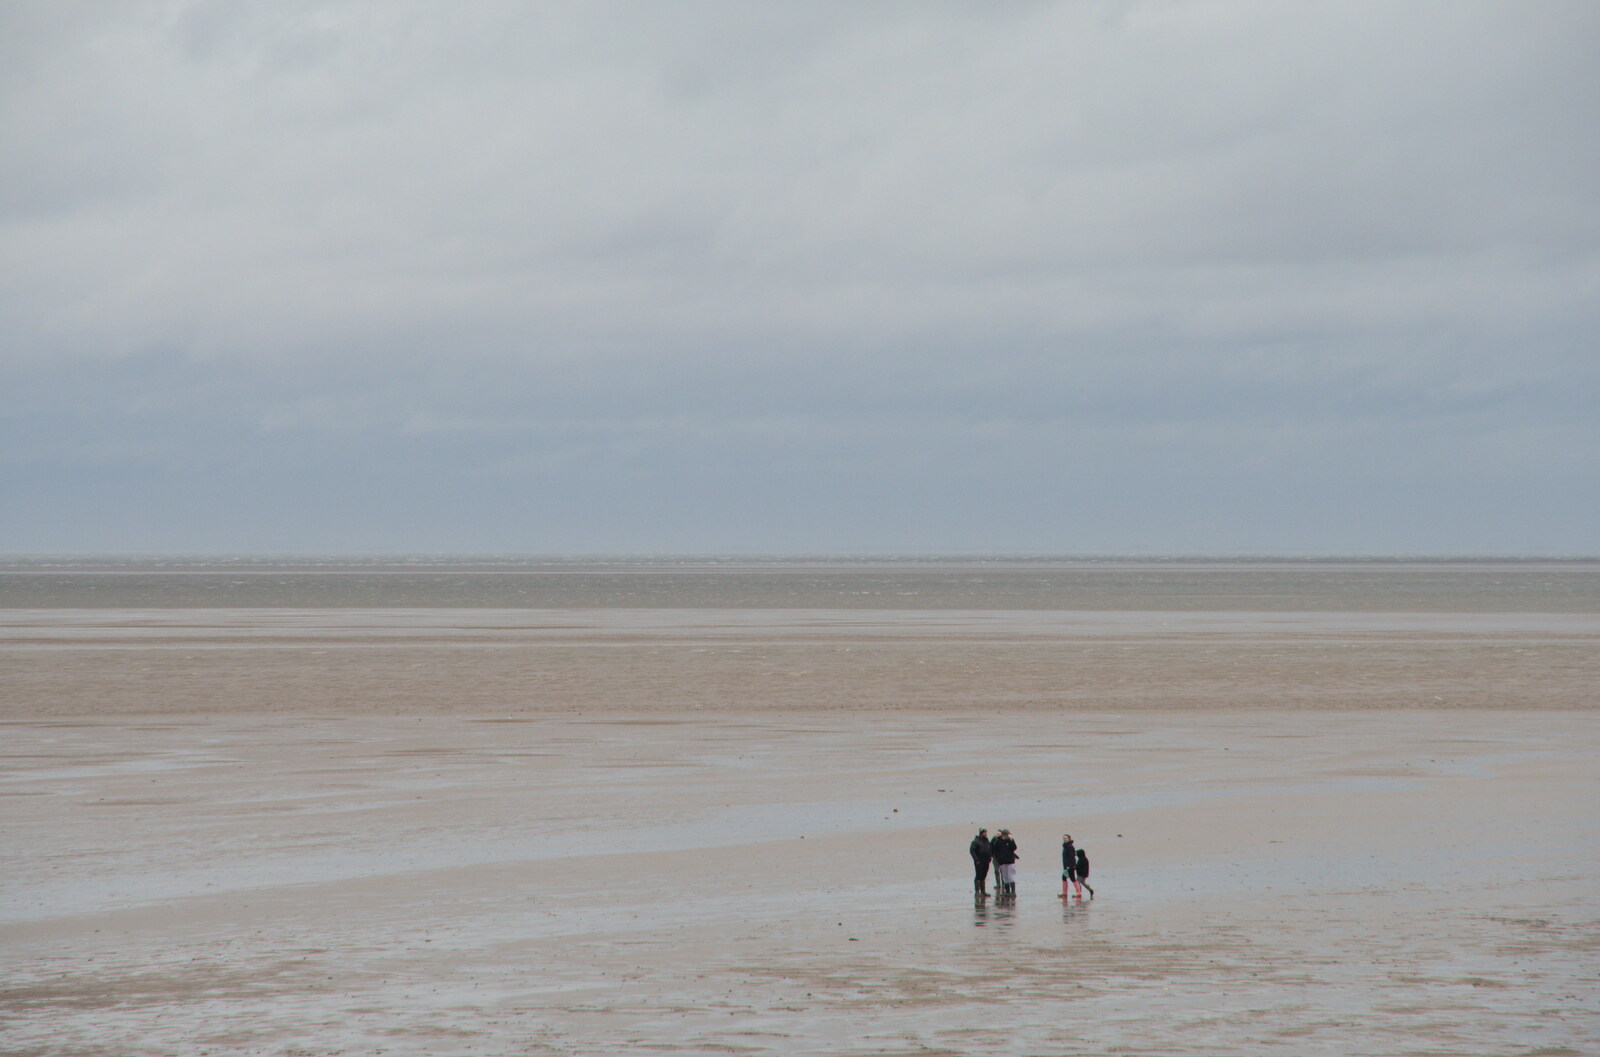 People out on the extensive mudflats from A Postcard From Kings Lynn and "Sunny Hunny" Hunstanton, Norfolk - 31st October 2020